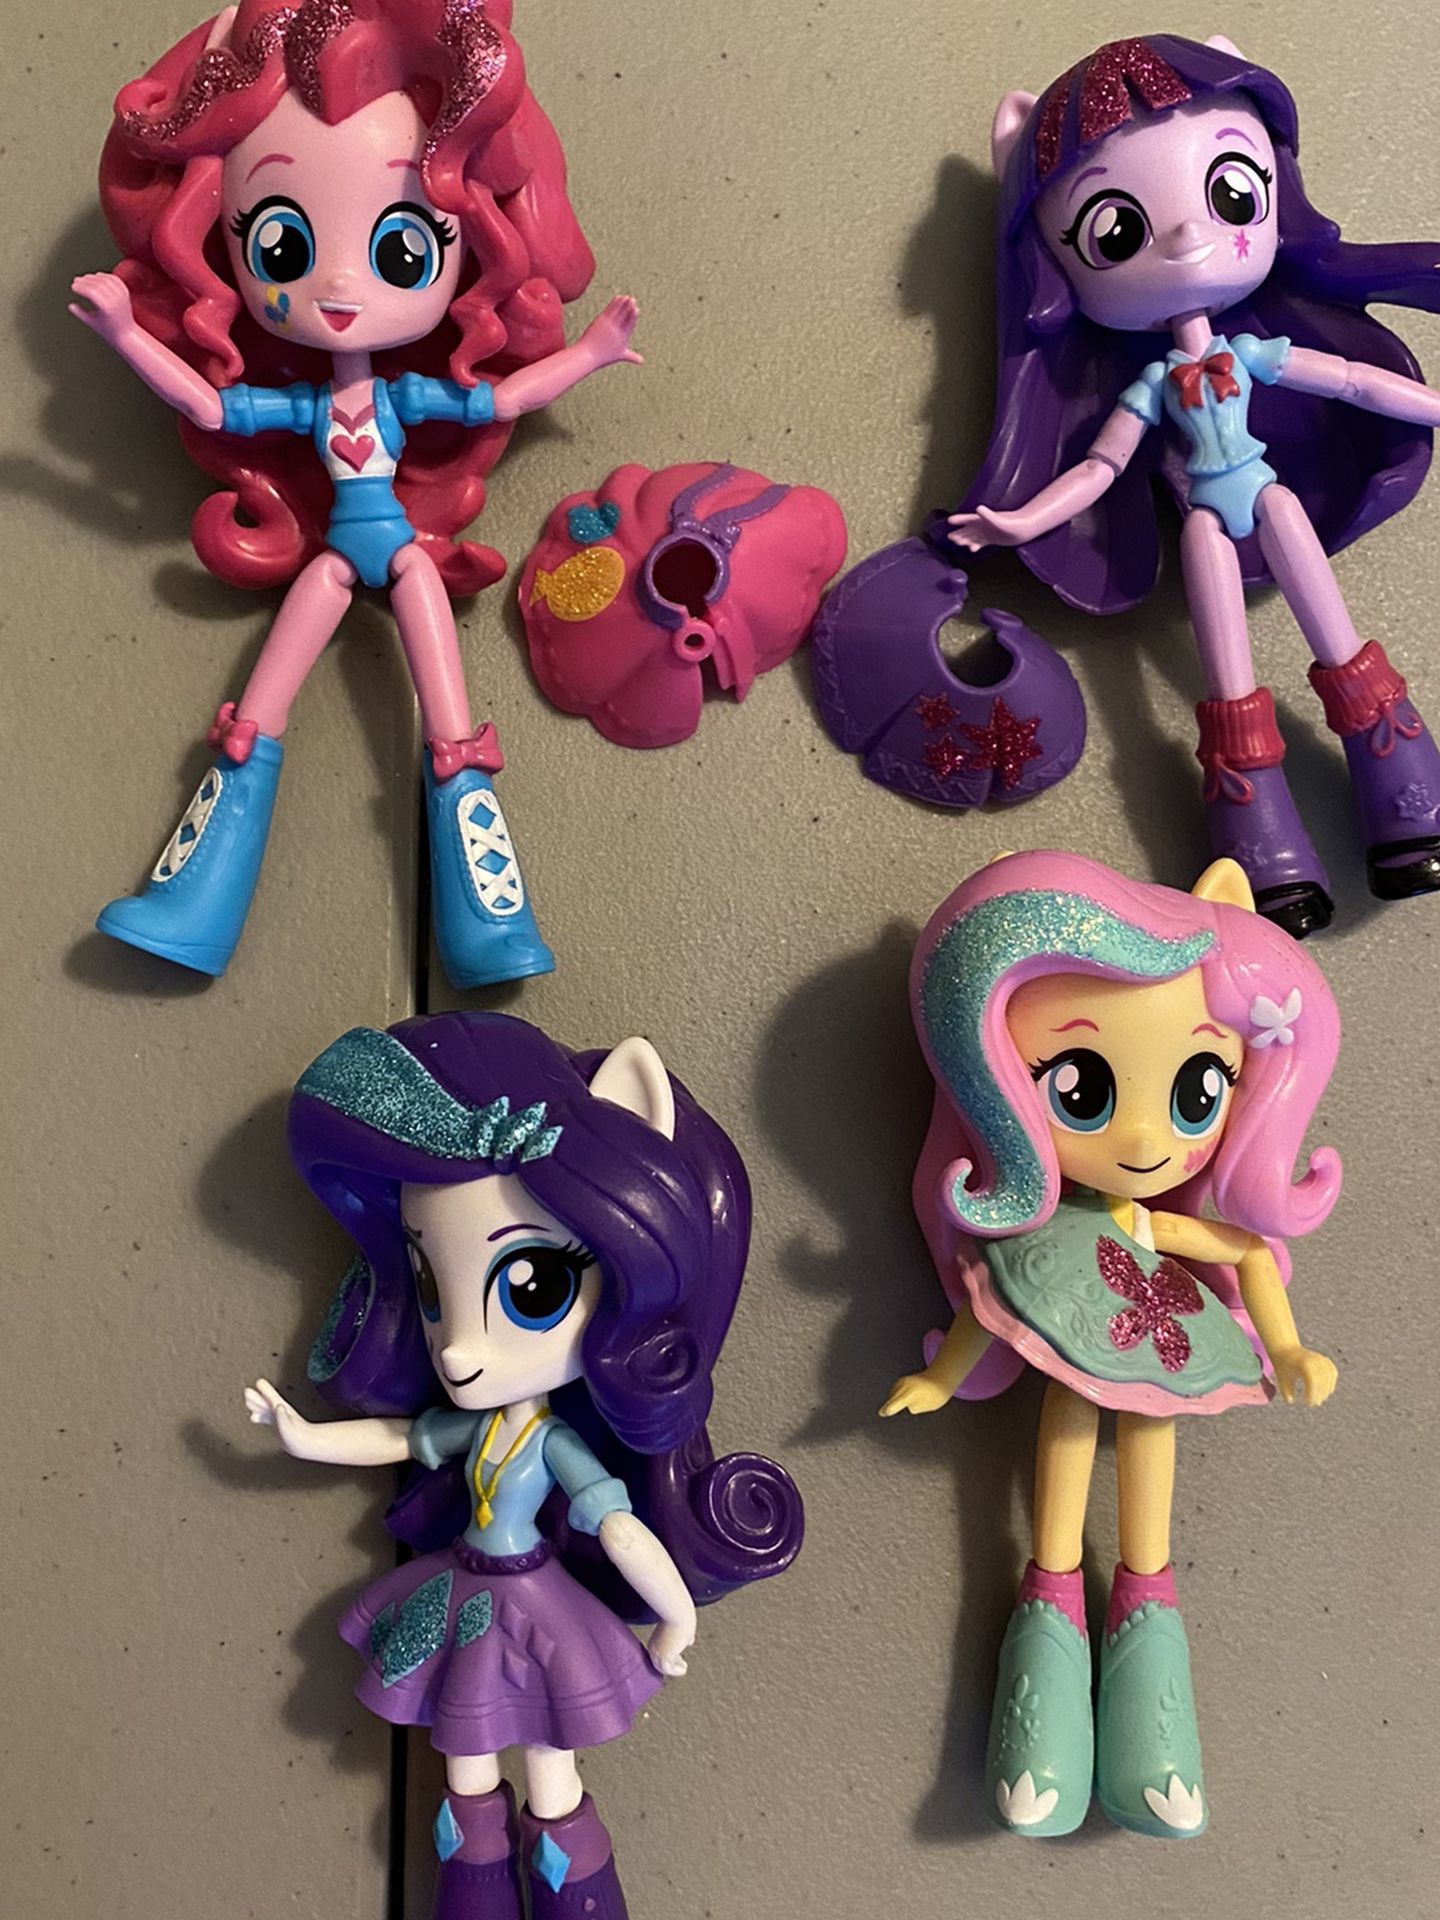 My Little Pony, Equestria Girls Minis, Sparkle Collection. Includes mini dolls of Rarity, Fluttershy, Twilight Sparkle, and Pinkie Pie. Dolls are 4 t